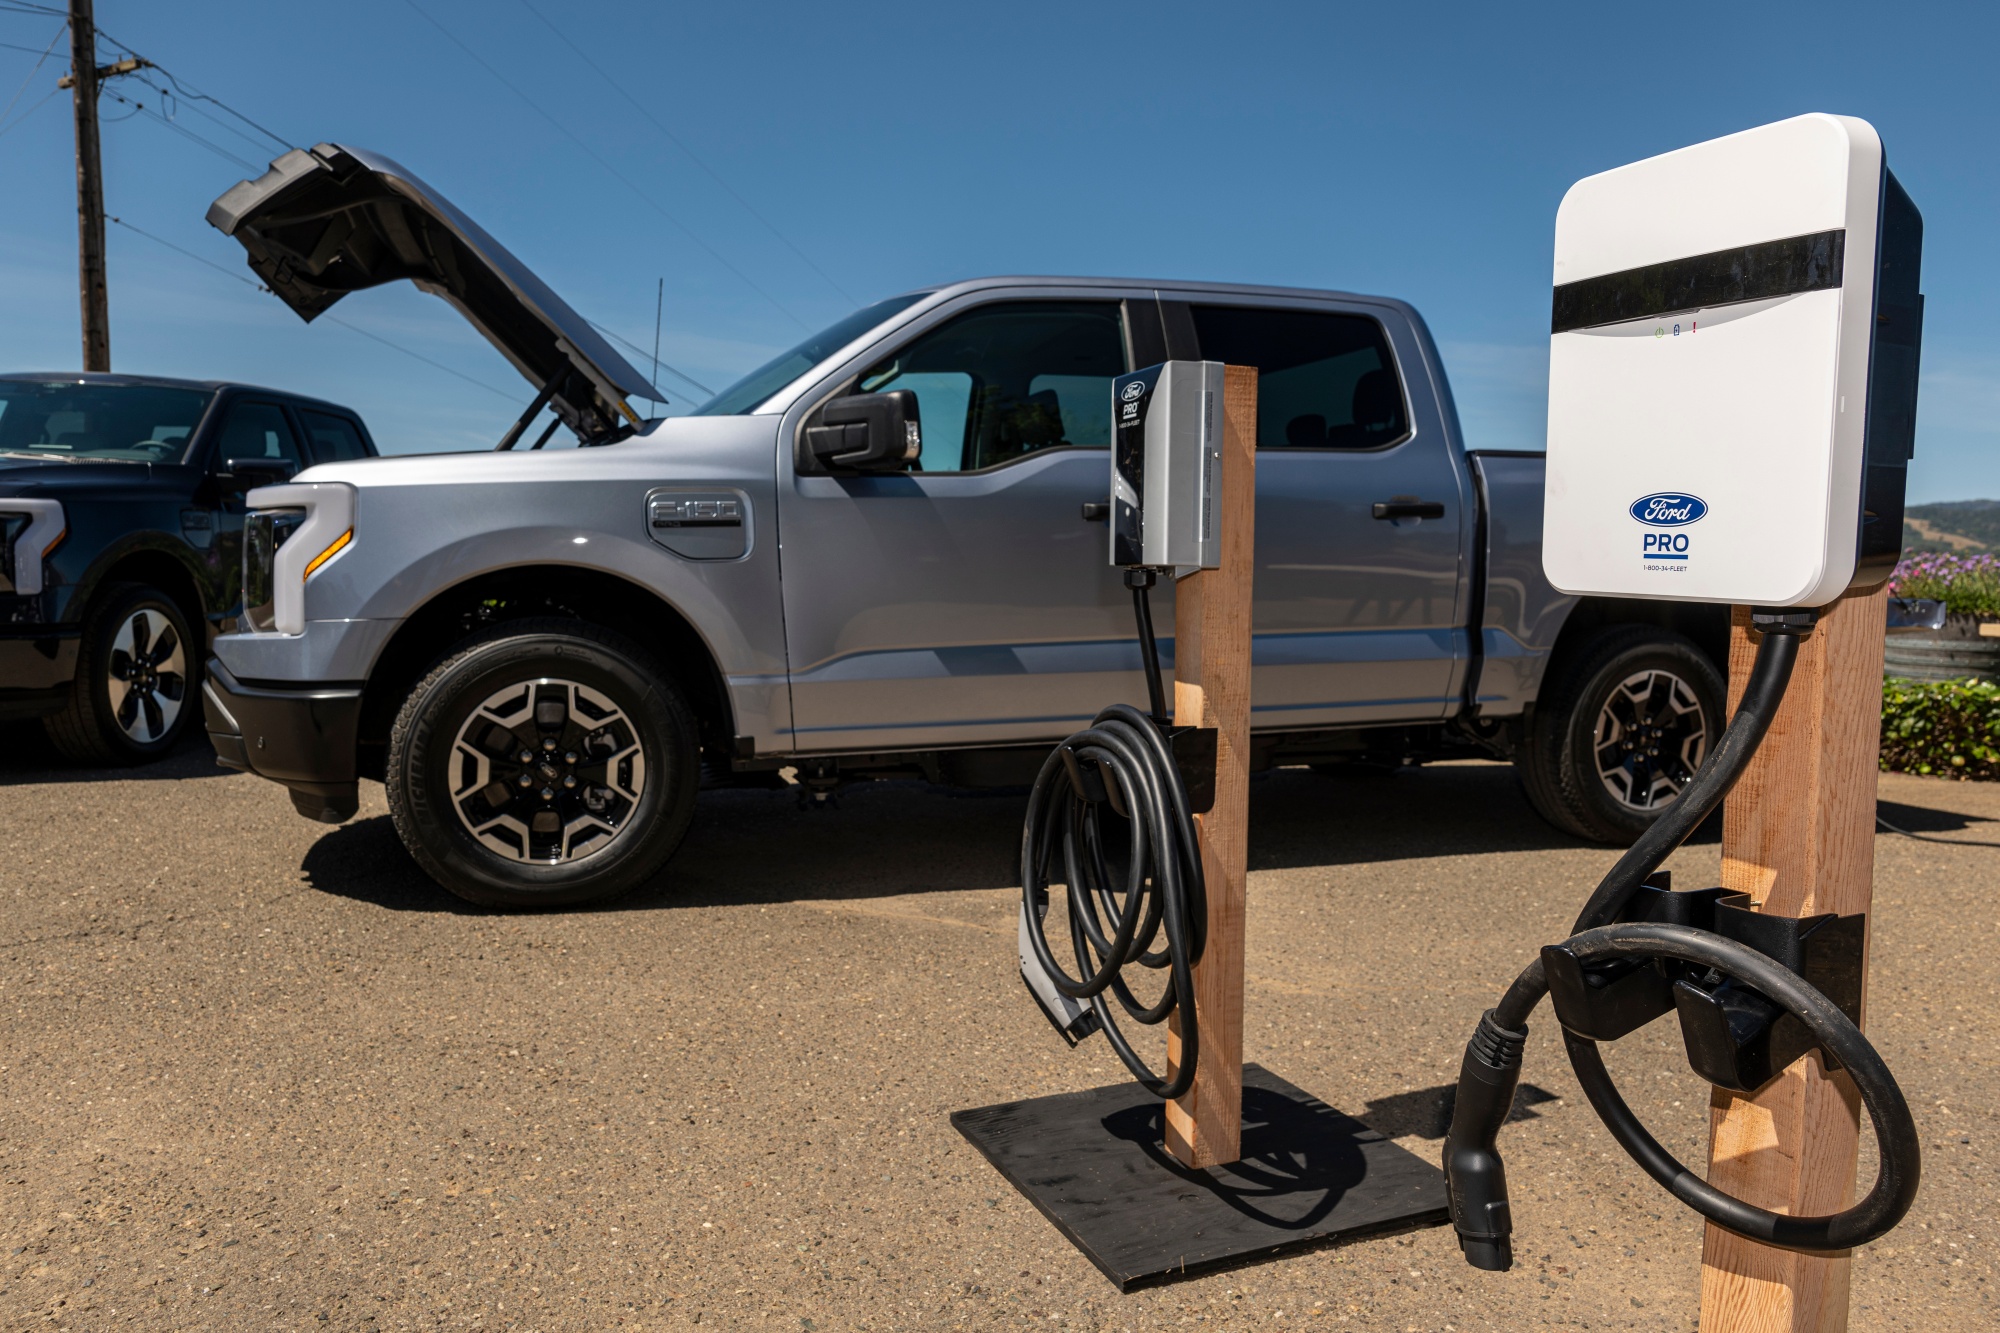 An F-150 Lightning pickup next to Ford Pro&nbsp;chargers during a media event last month in Healdsburg, California.